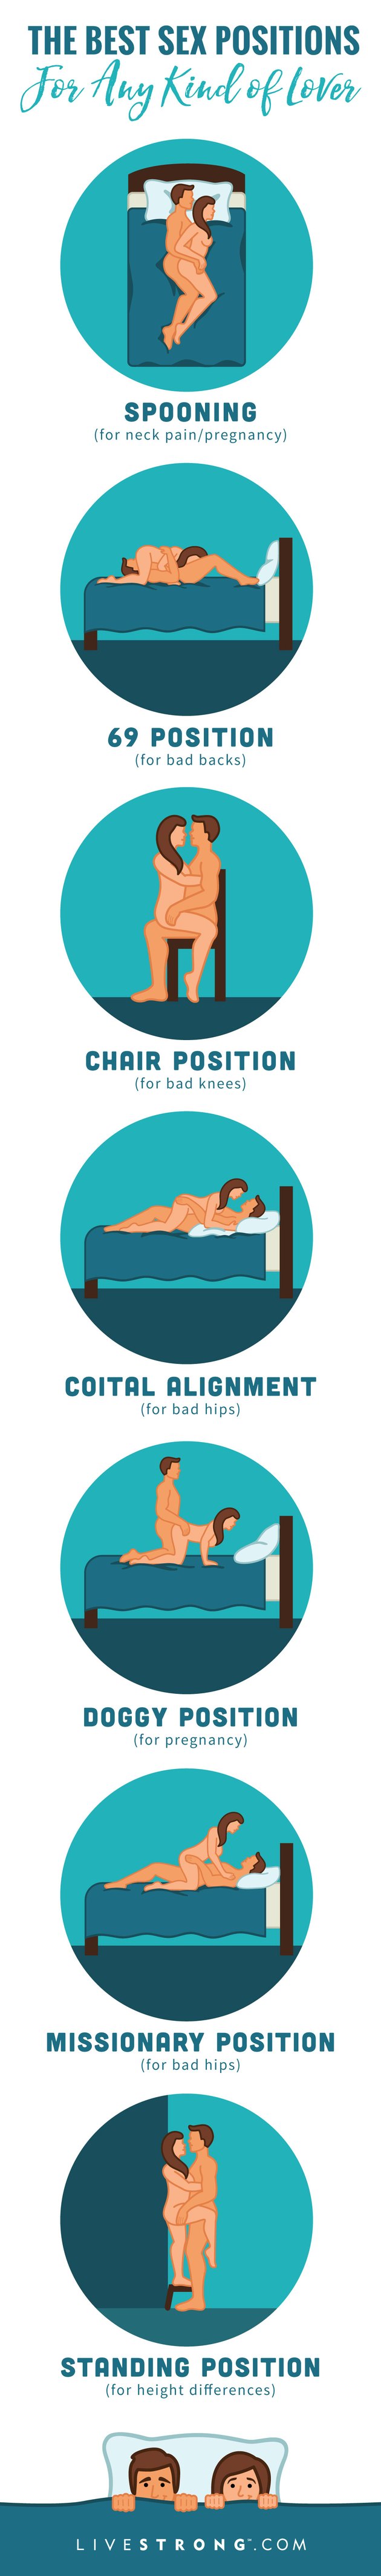 The Best Sex Positions For Any Kind Of Lover